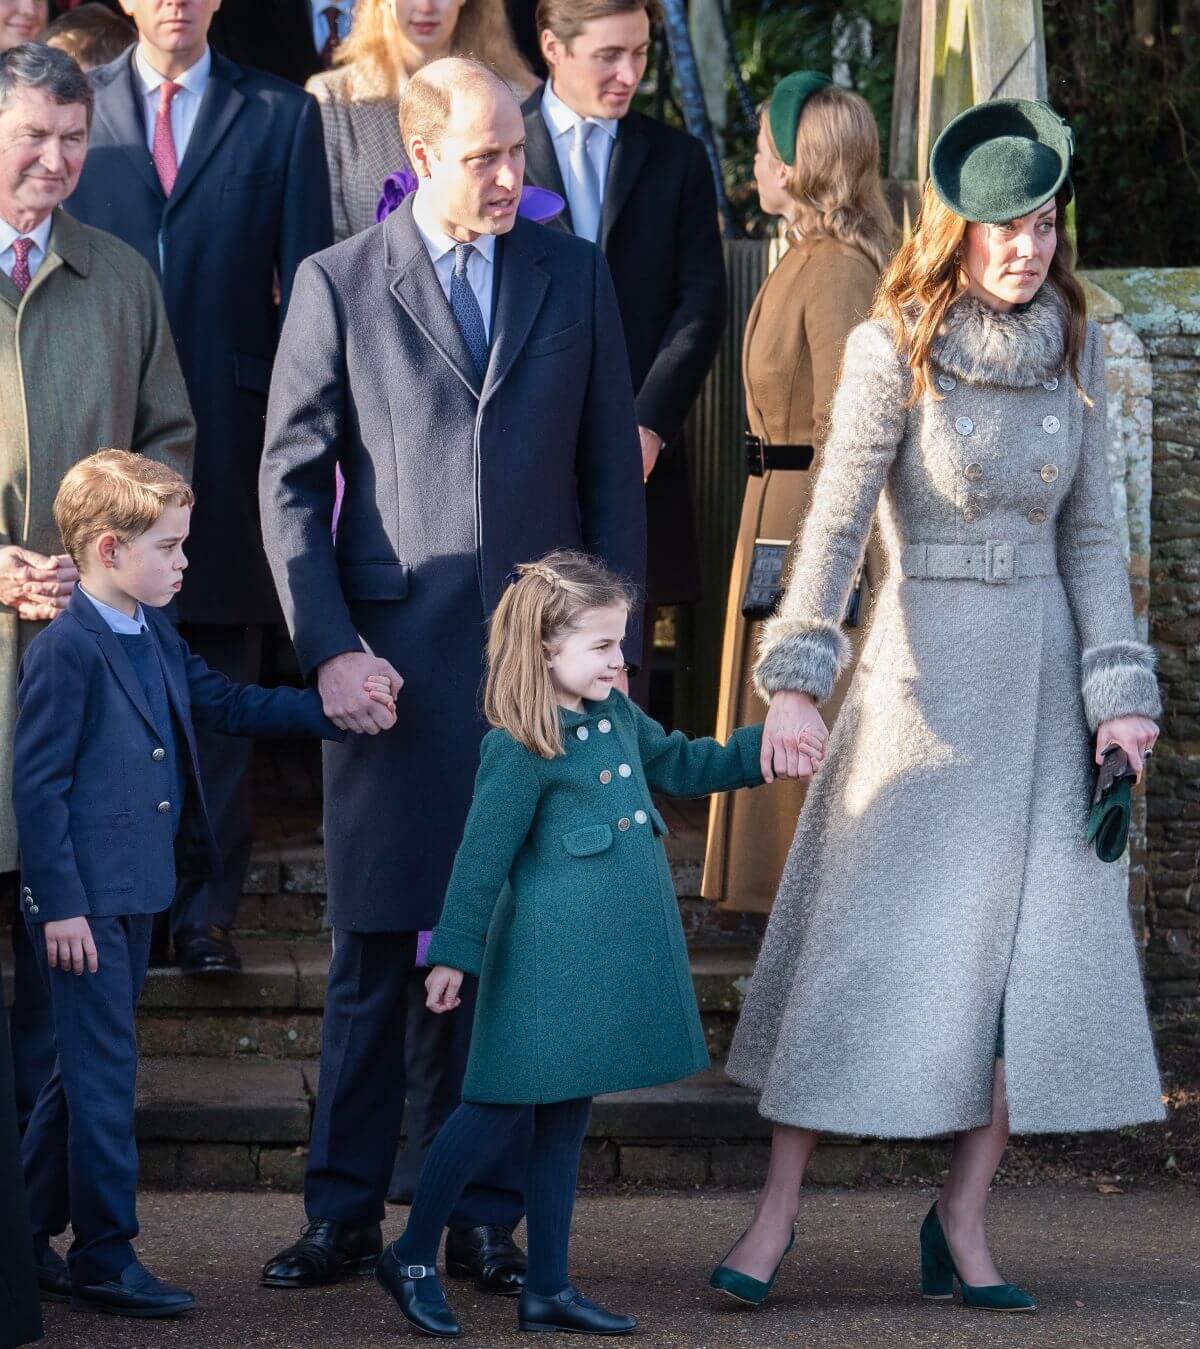 Prince William, Kate Middleton, Prince George, and Princess Charlotte attend the Christmas Day church service